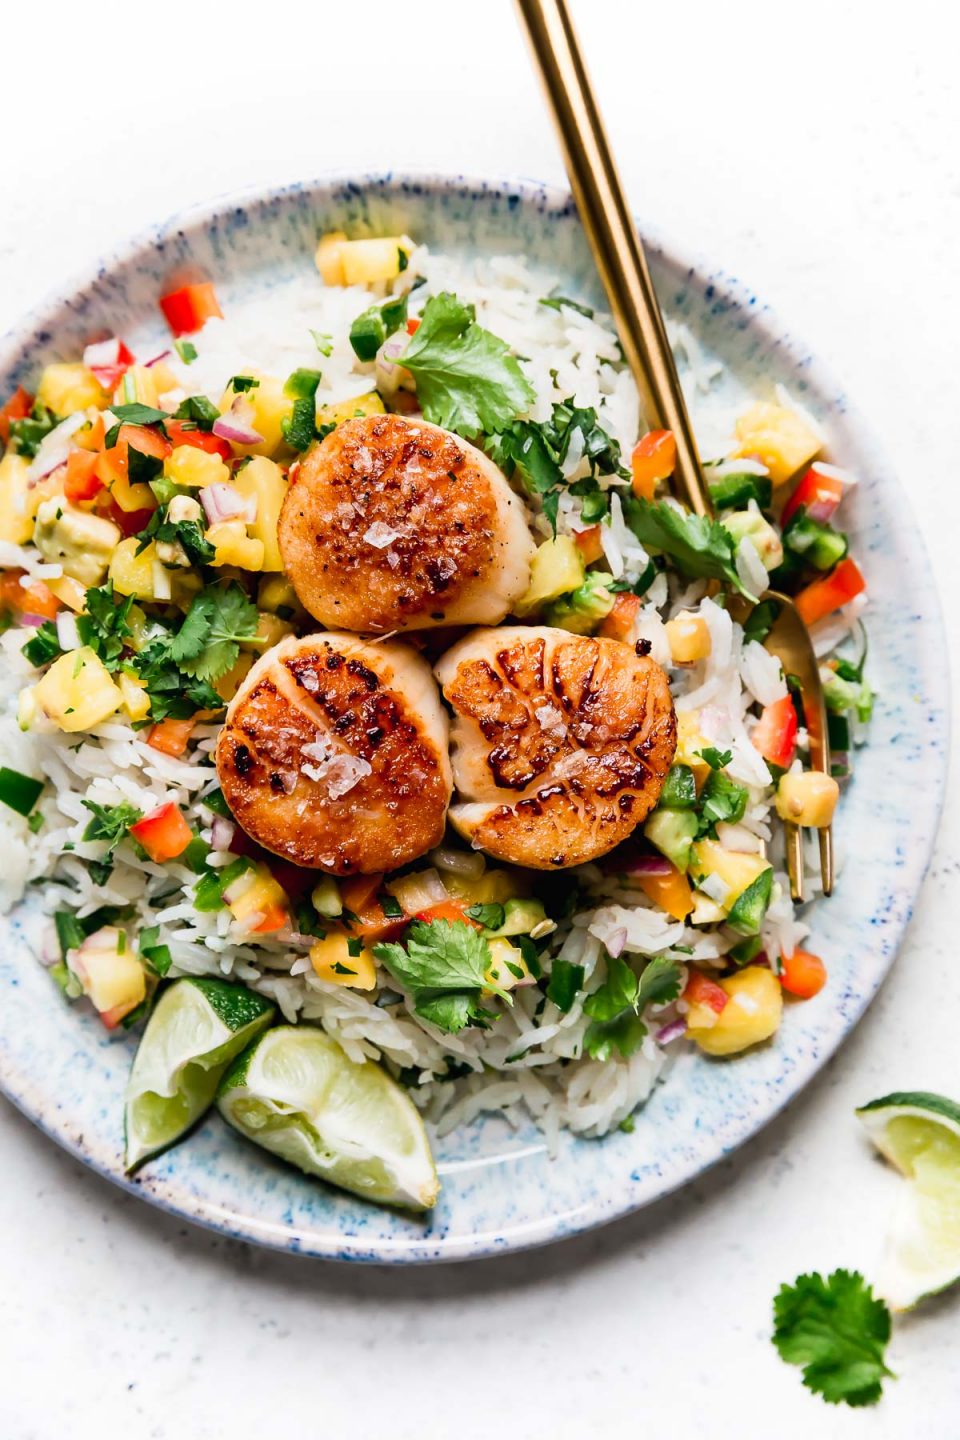 3 seared scallops served on a blue plate with coconut rice & mango salsa. The easiest healthy seared scallops recipe!